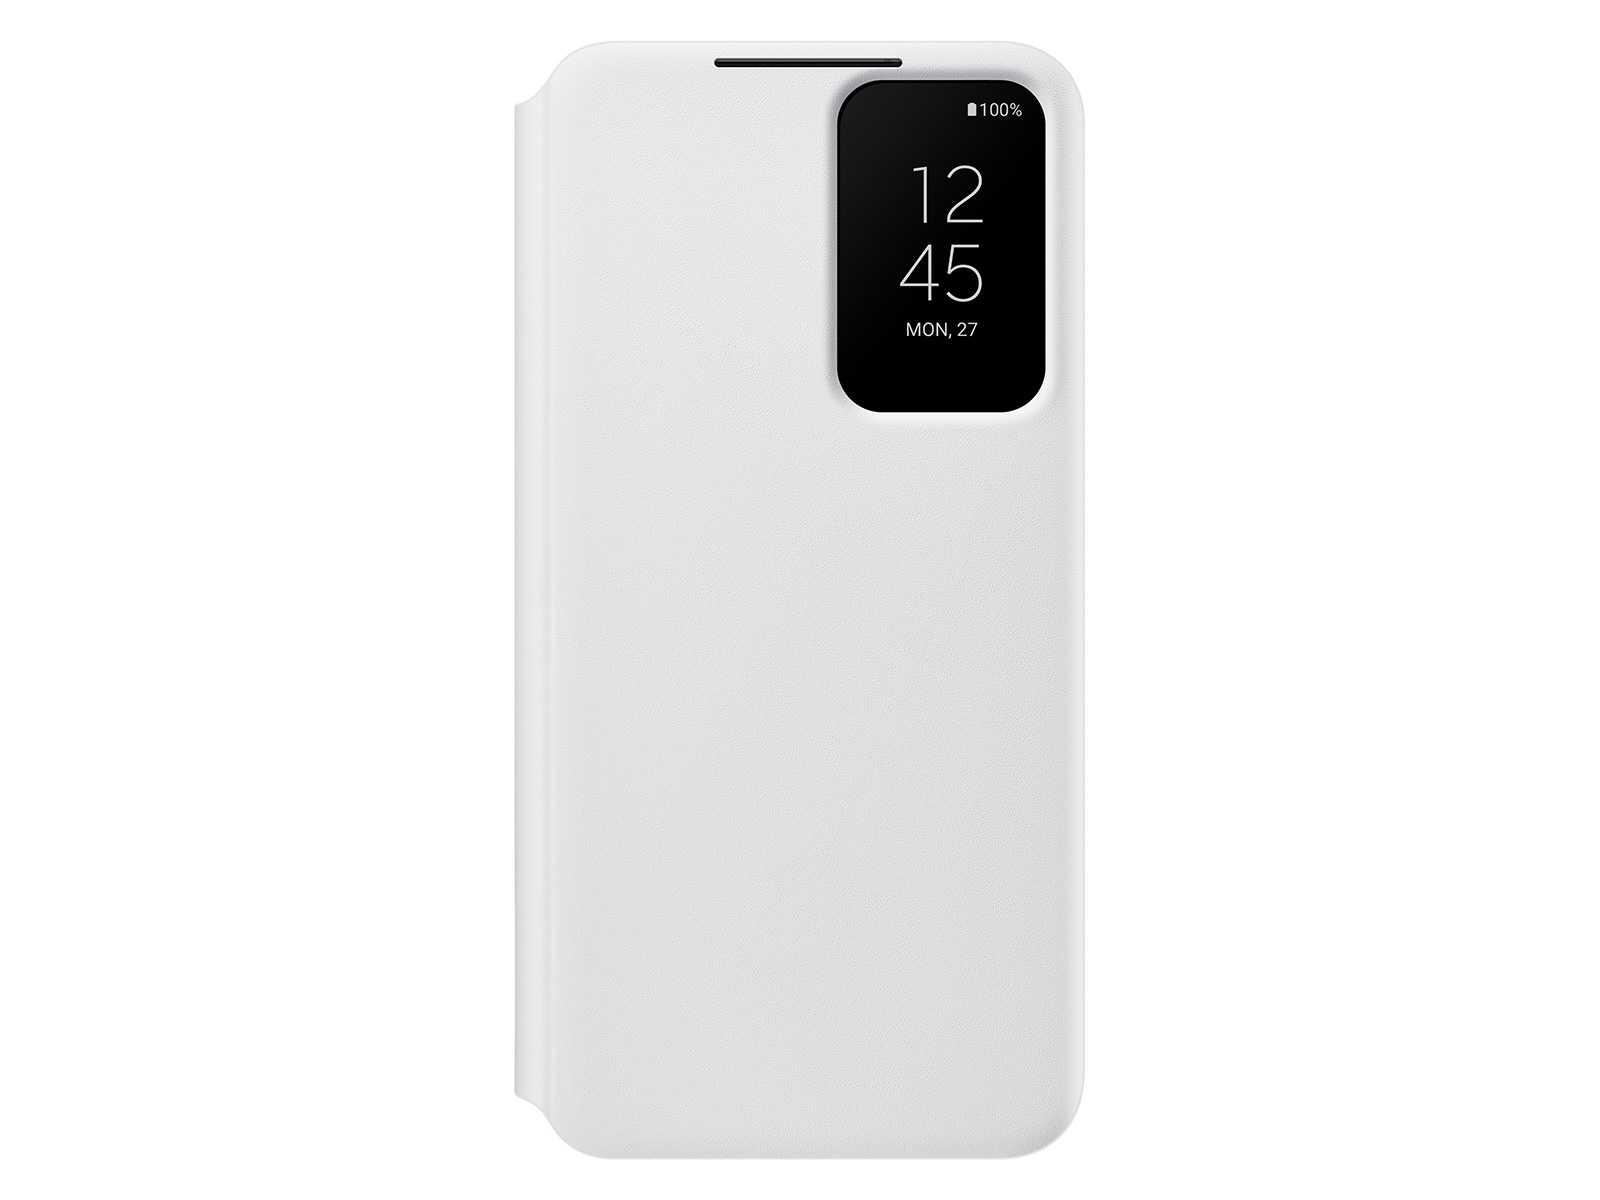 S22 Flip Cover, White Mobile Accessories - EF-ZS901CWEGUS | Samsung US